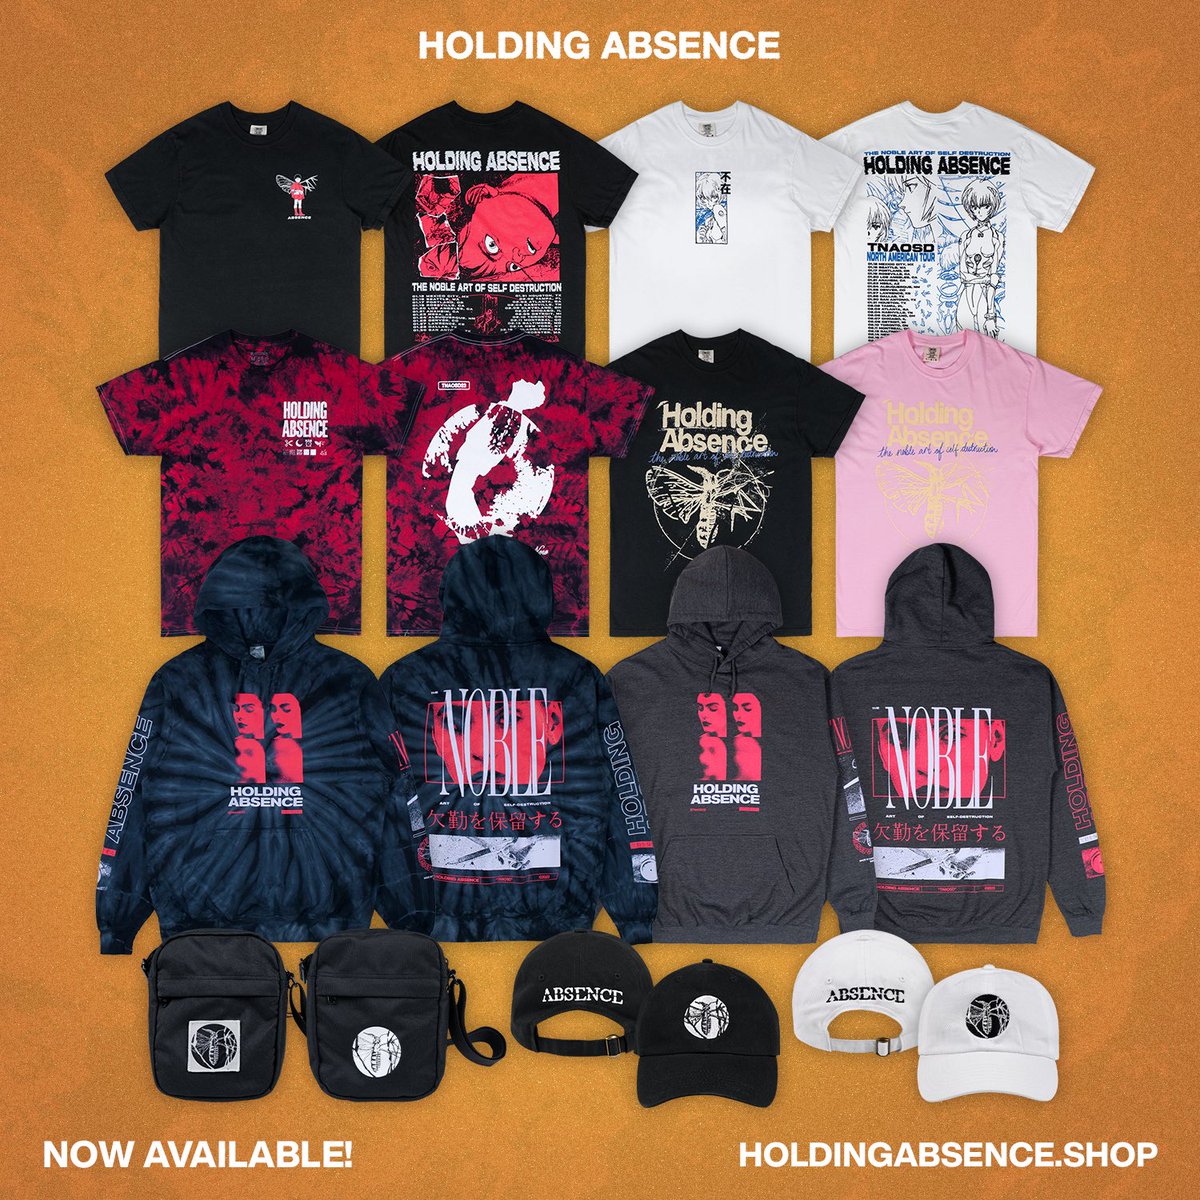 Our recent tour range in North America was one of our favourite we’ve ever done, so we’re pleased to be able to offer a limited amount of leftover merch to our US Store! 🇺🇸 🇨🇦 Btw, international fans - we also offer worldwide shipping 🌎 holdingabsence.shop